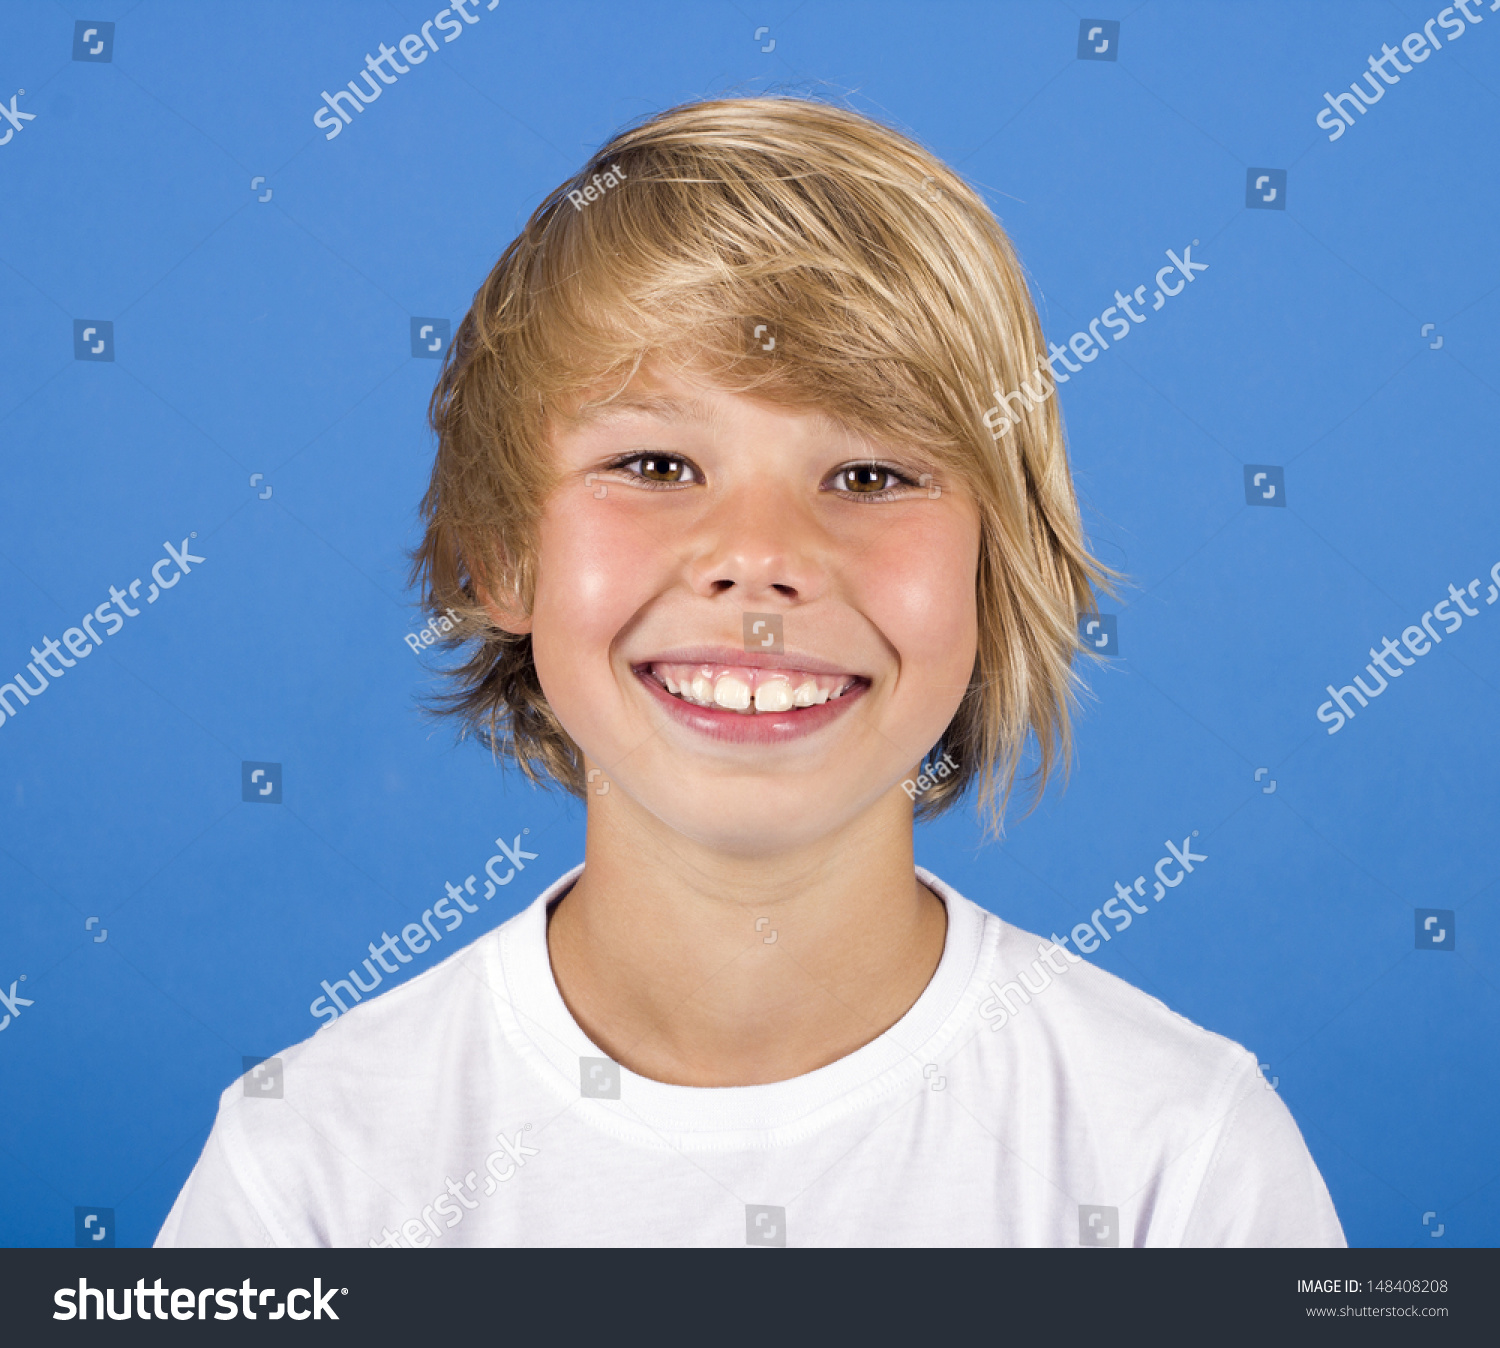 Adorable Young Happy Boy Stock Photo 148408208 - Shutterstock